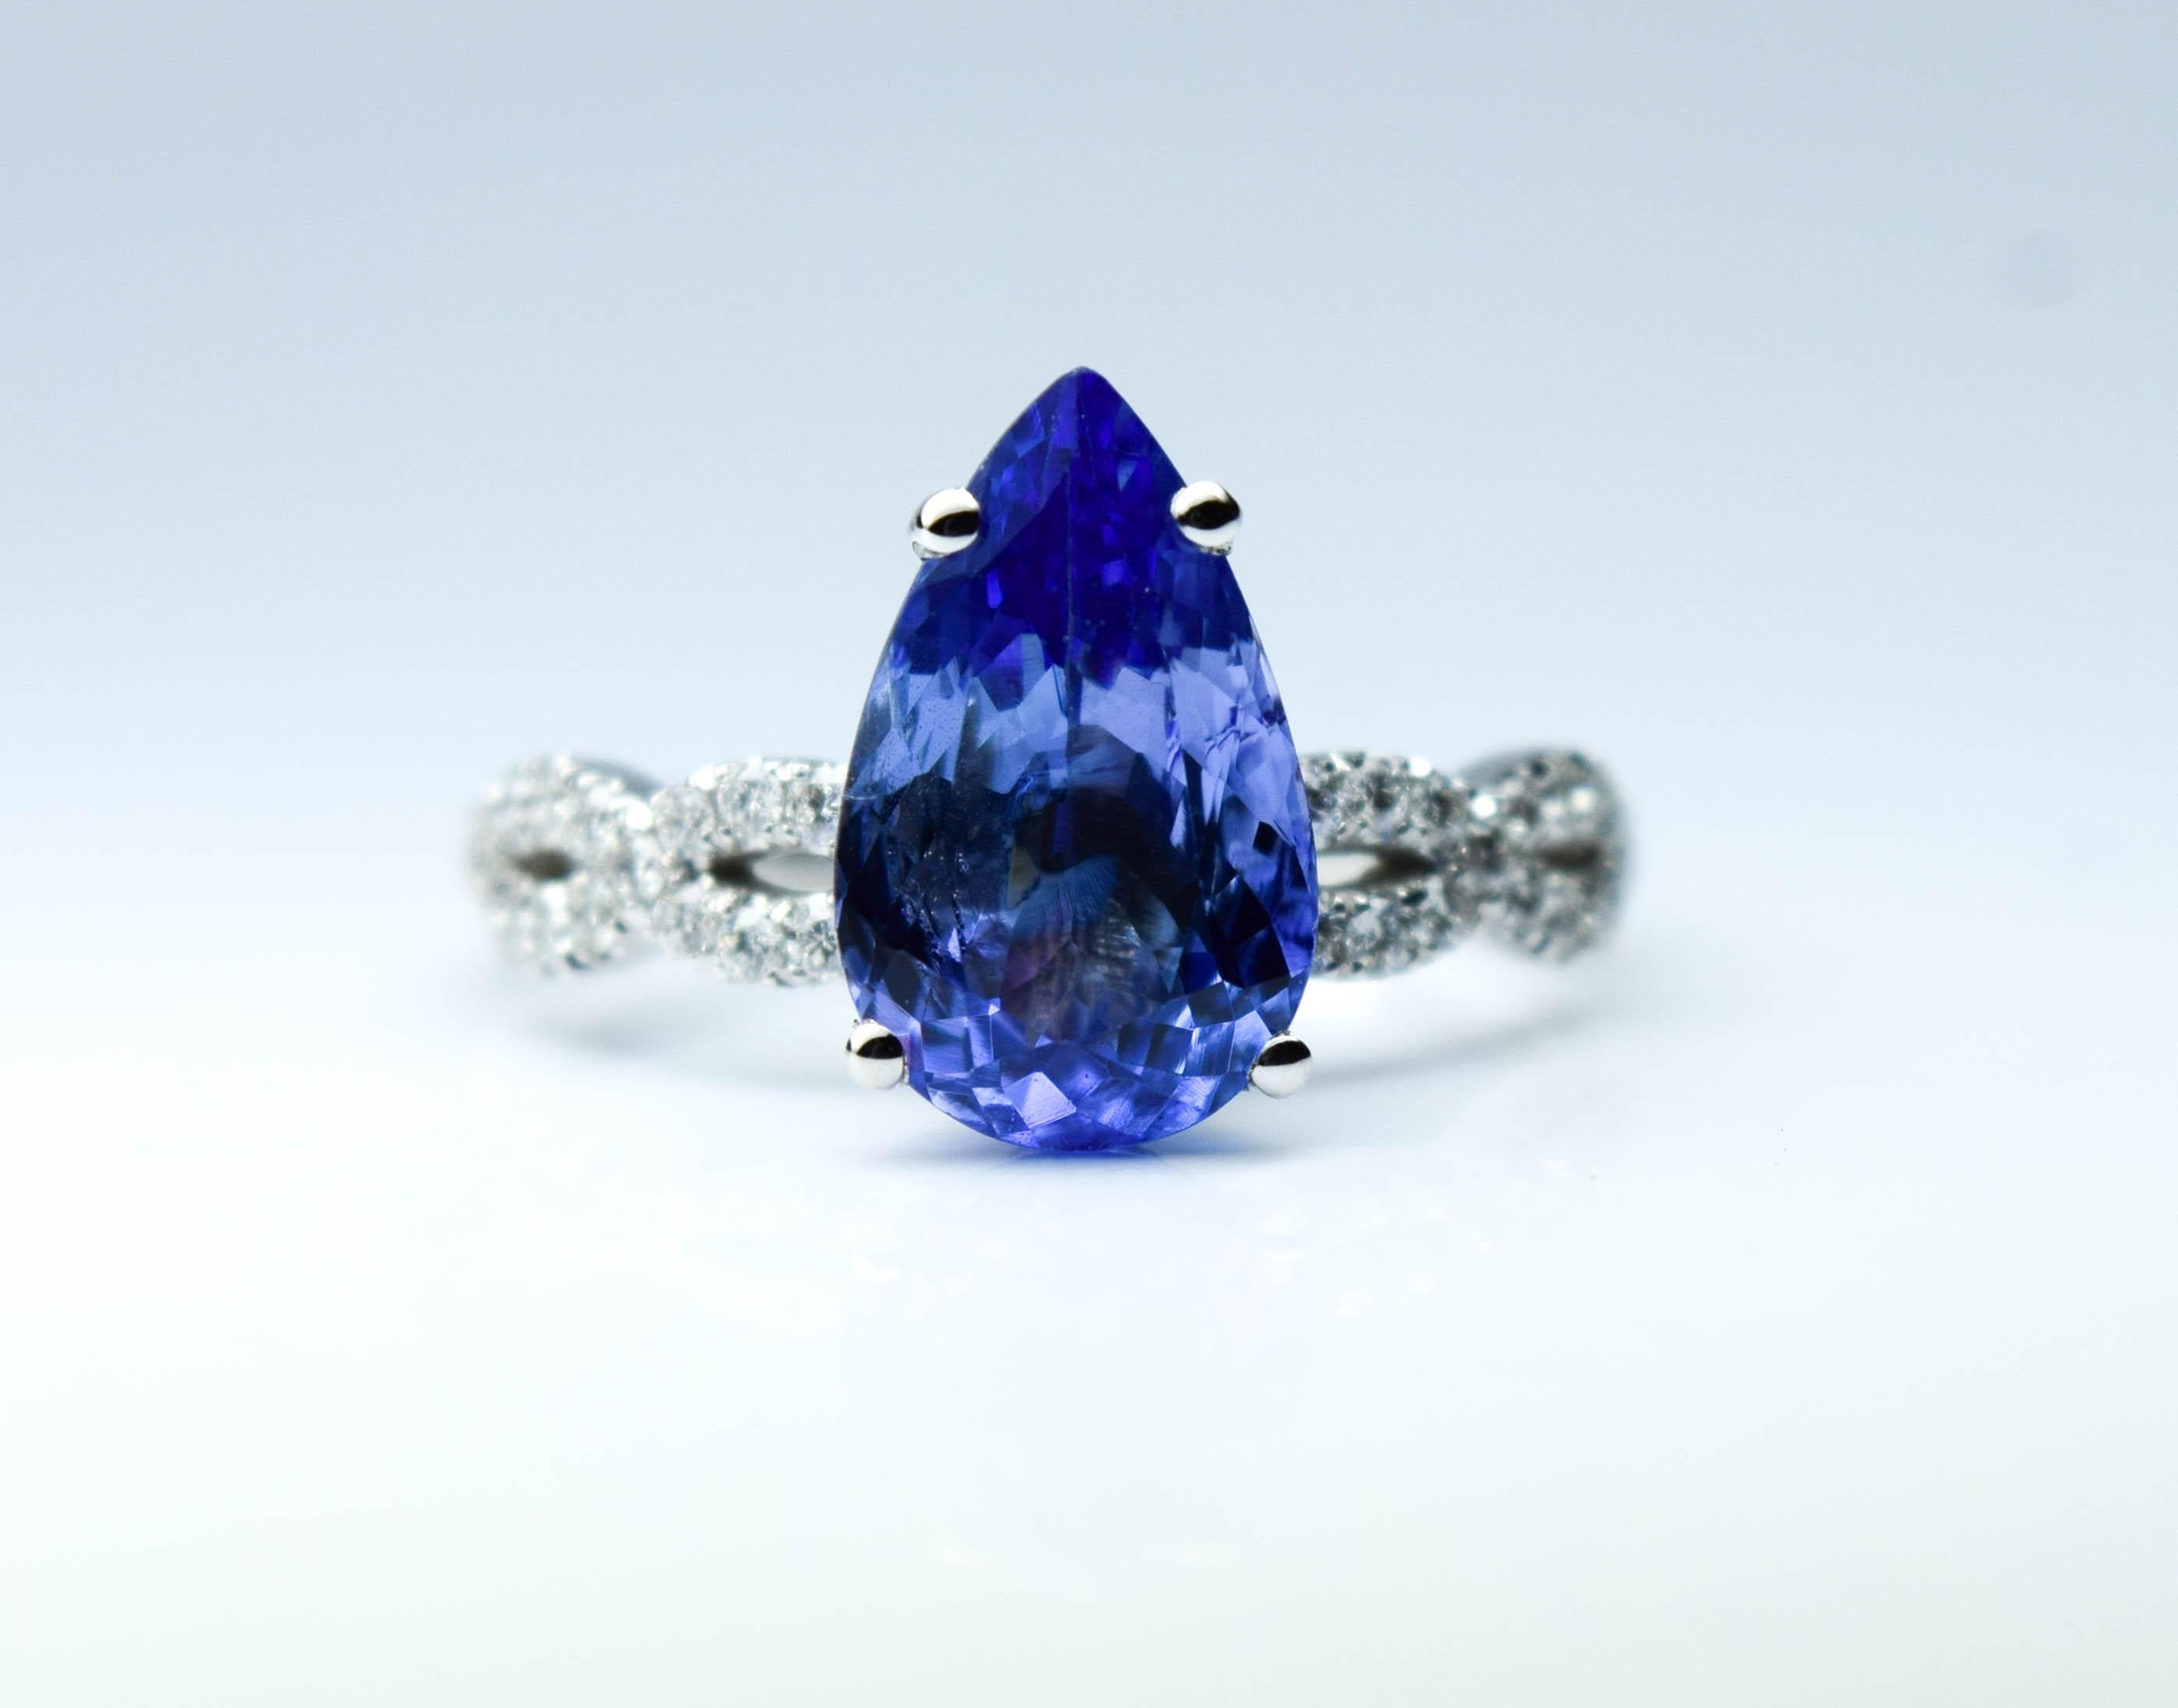 Stunning 1.20 carats center tanzanite with rich violet color accompanied by natural diamonds in a modern design in 18KT white gold. This ring will take 10 days handling time and will come with a box, certificate of authenticity and insured express